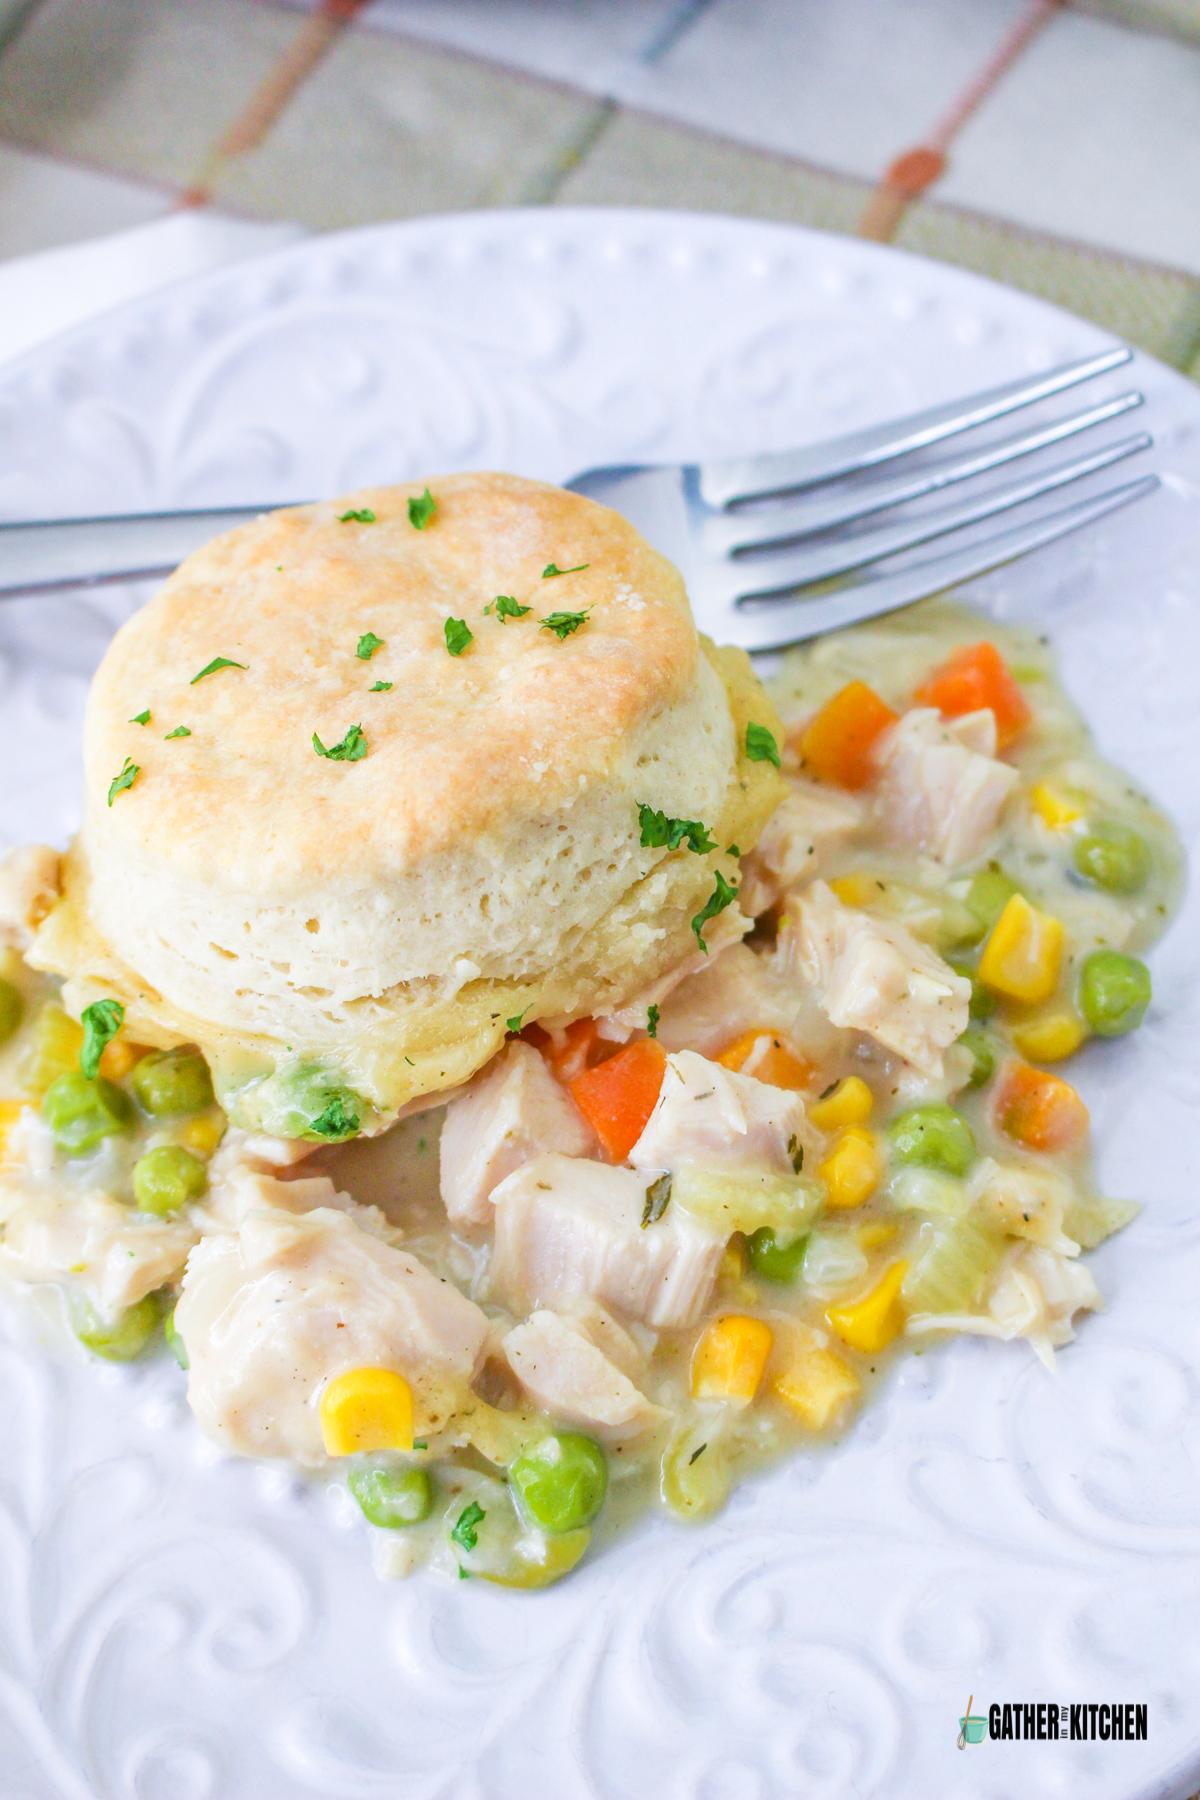 A plate of Turkey Pot Pie with biscuit on plate with a fork.